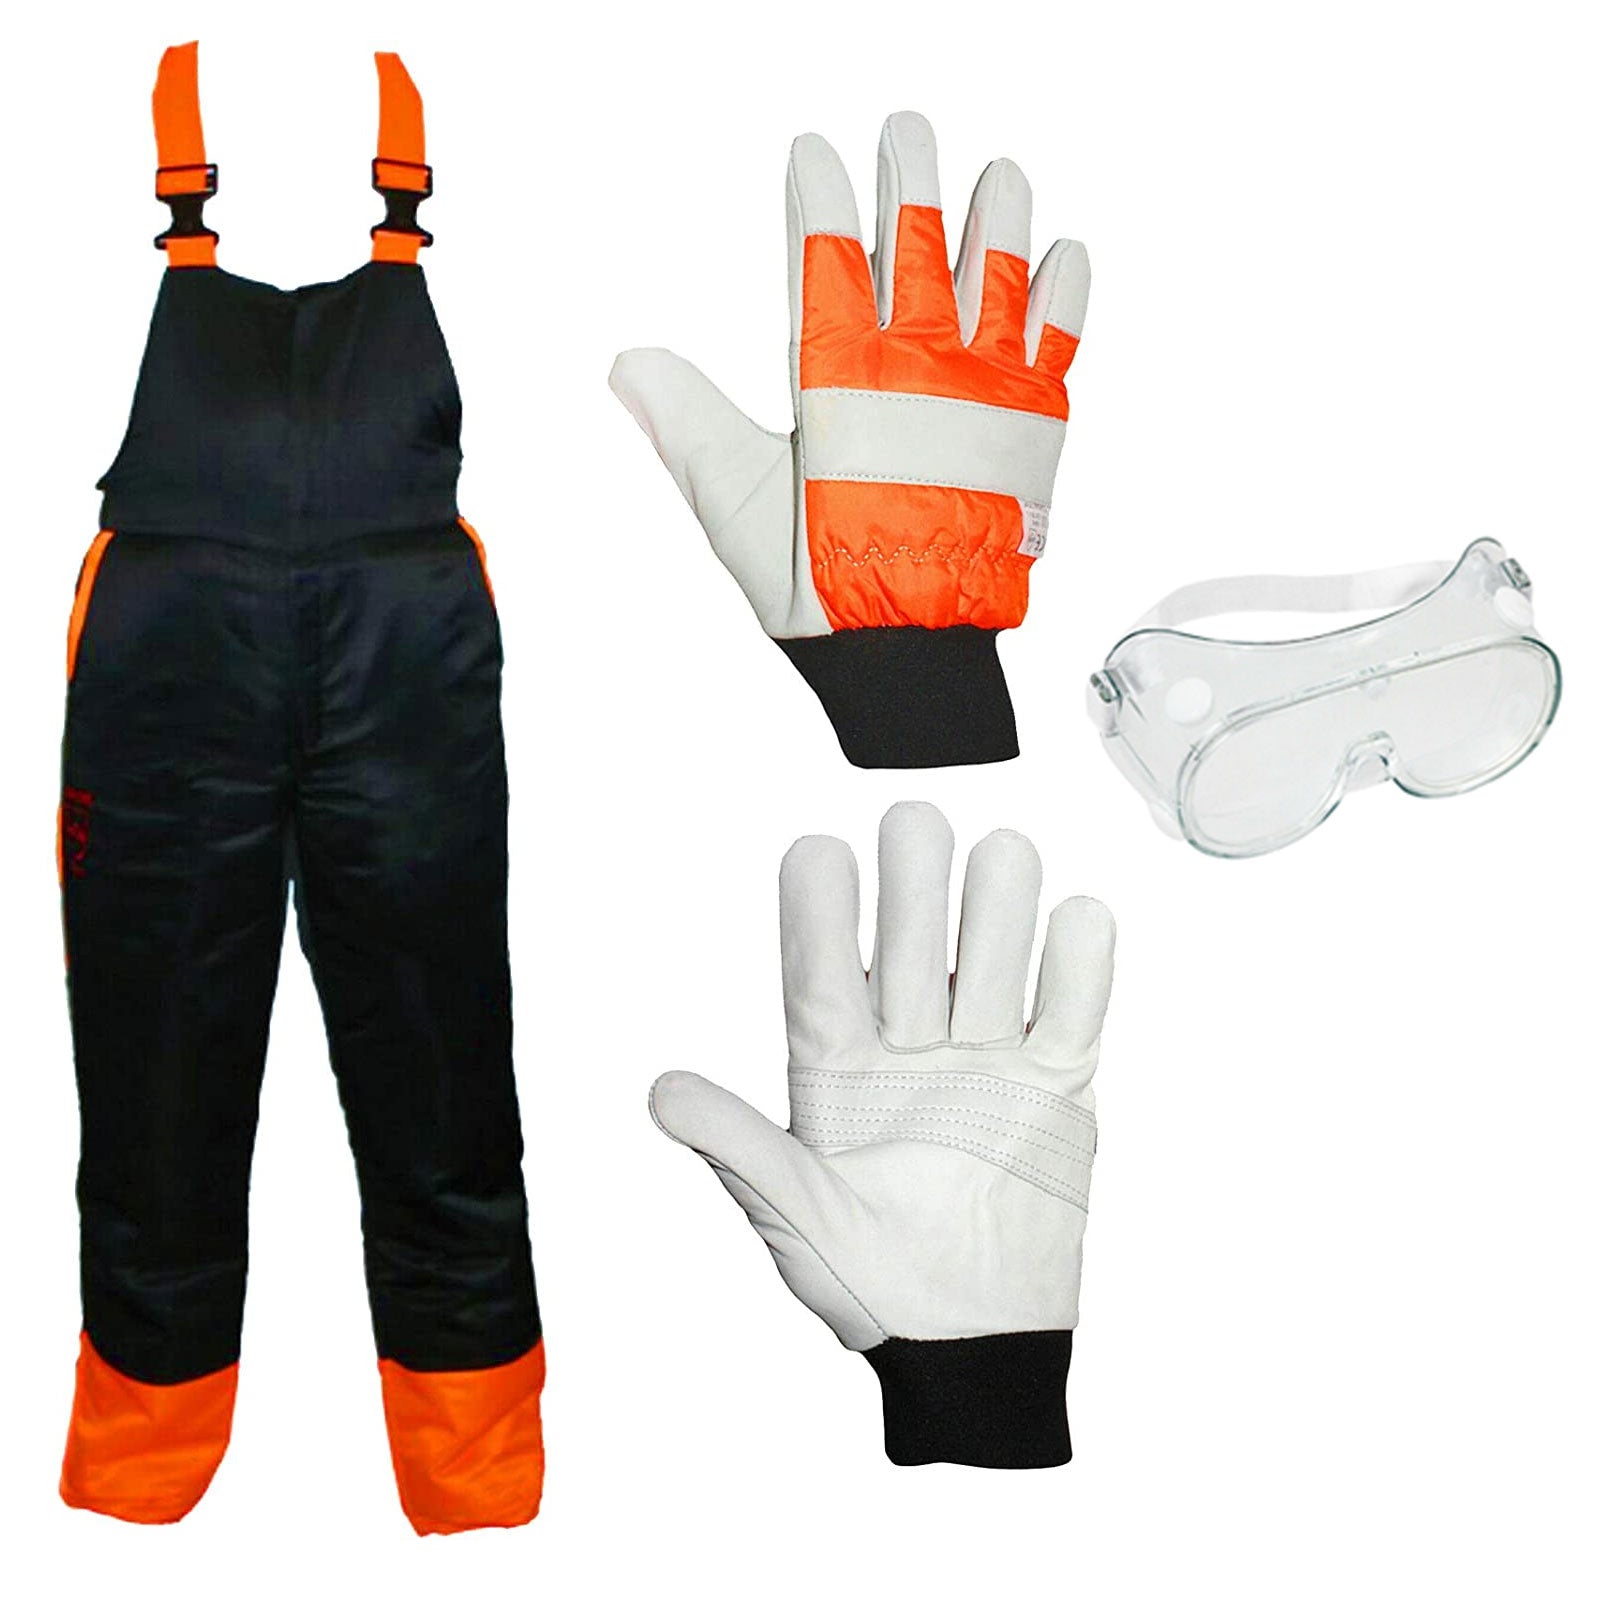 Chainsaw Bib Brace Large 34/38 Class A 20m/s + Forestry Gloves + Safety Goggles